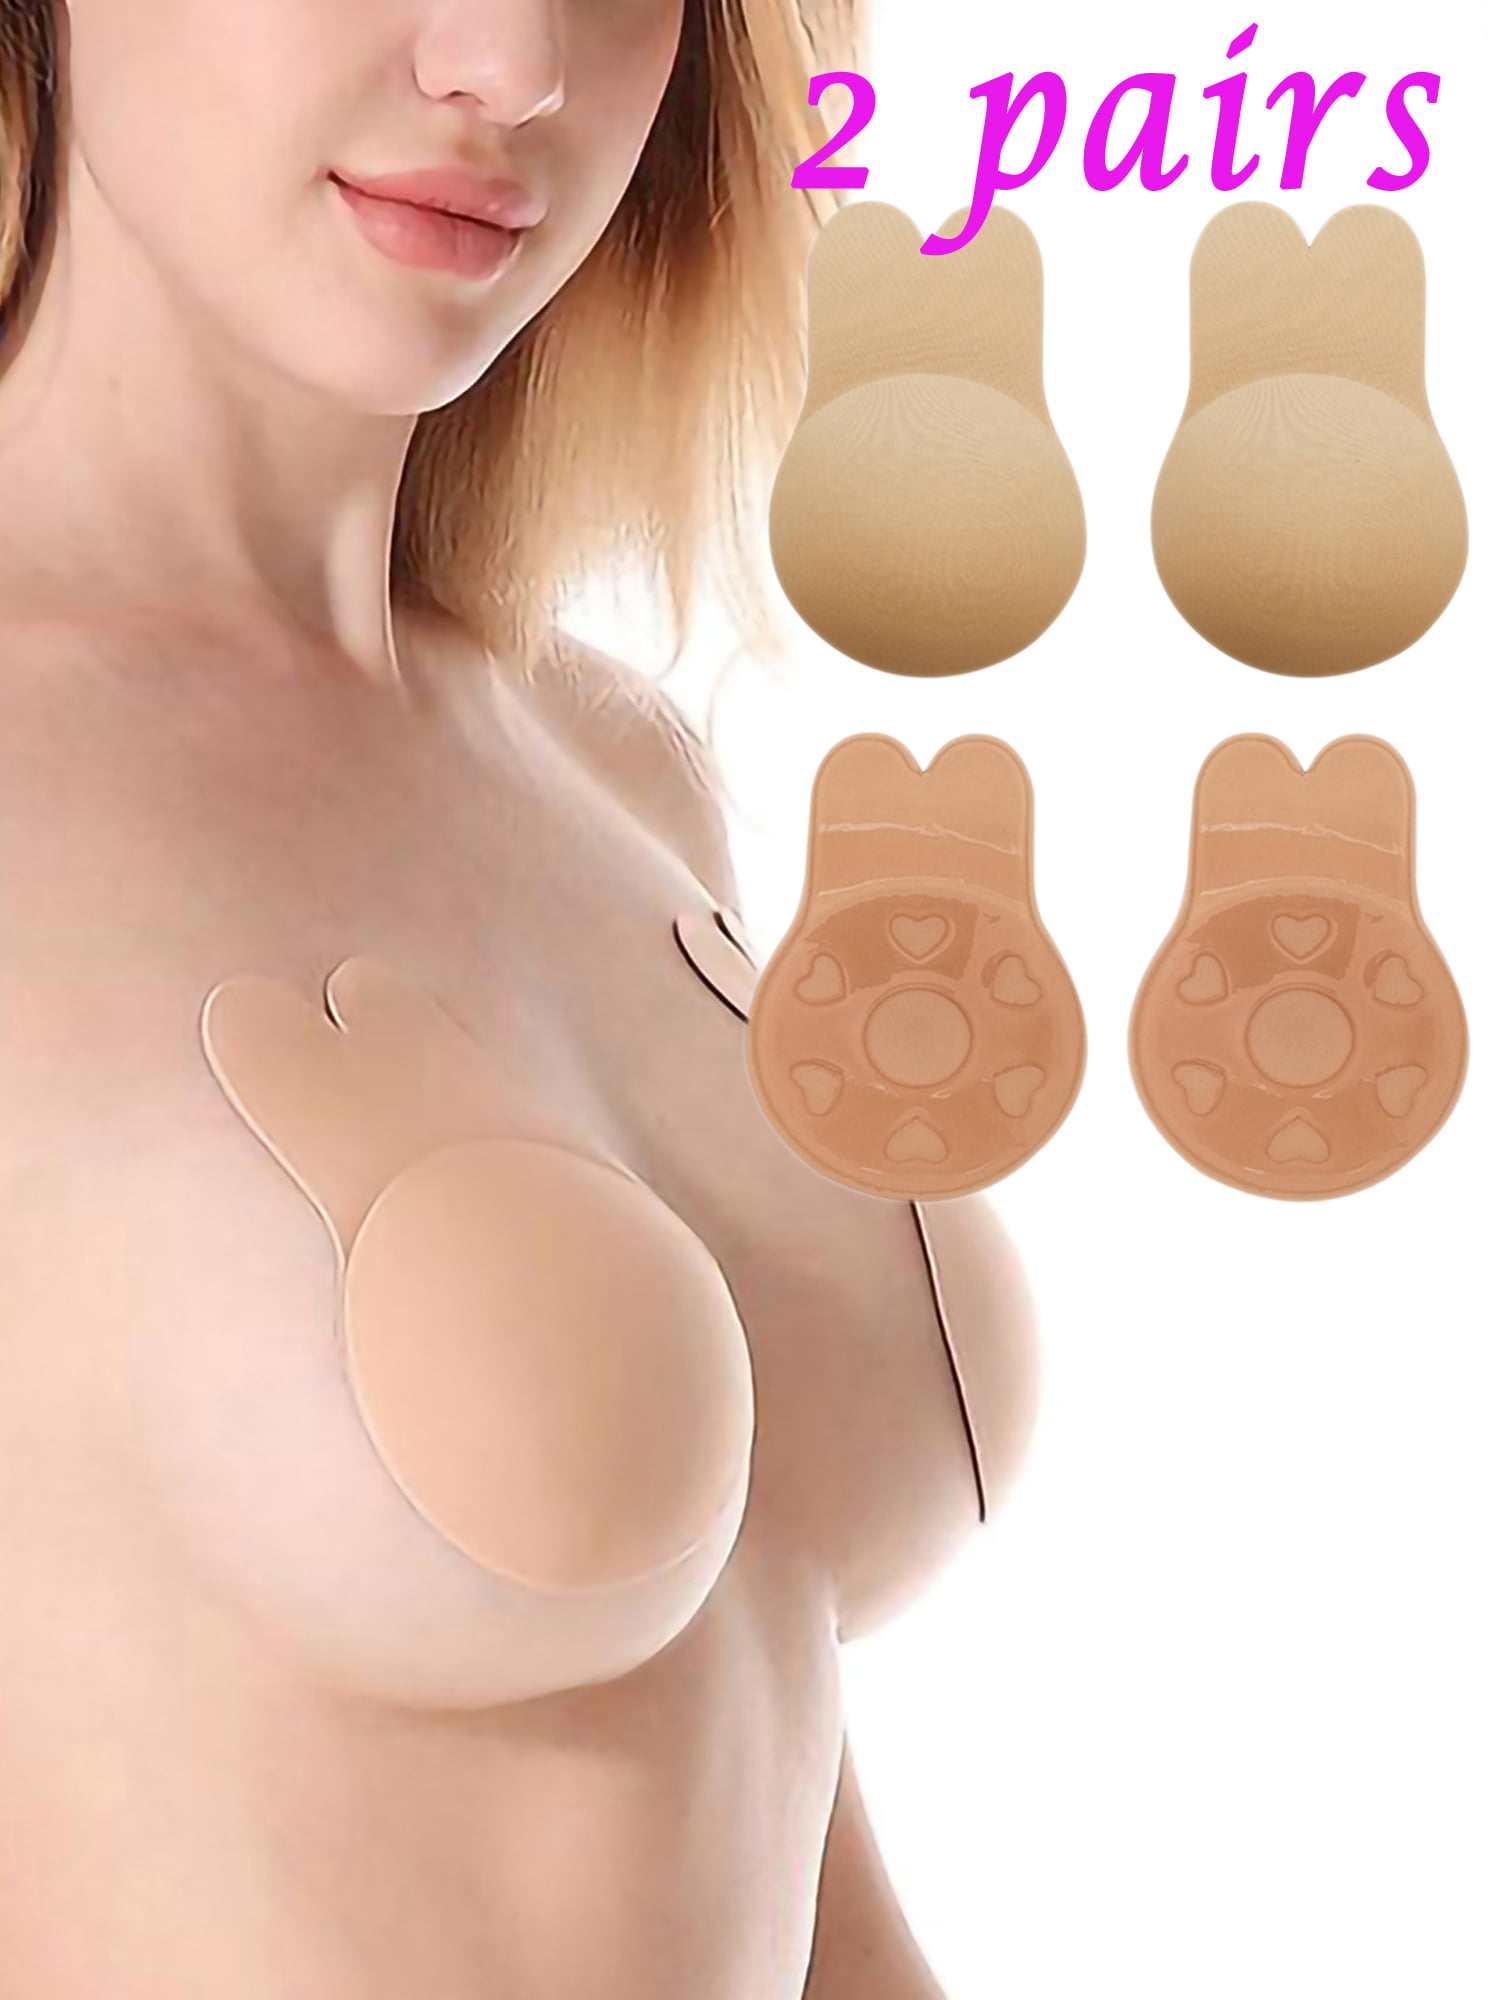 2 Pair Silicone Nipple Covers for Women – abit nippy